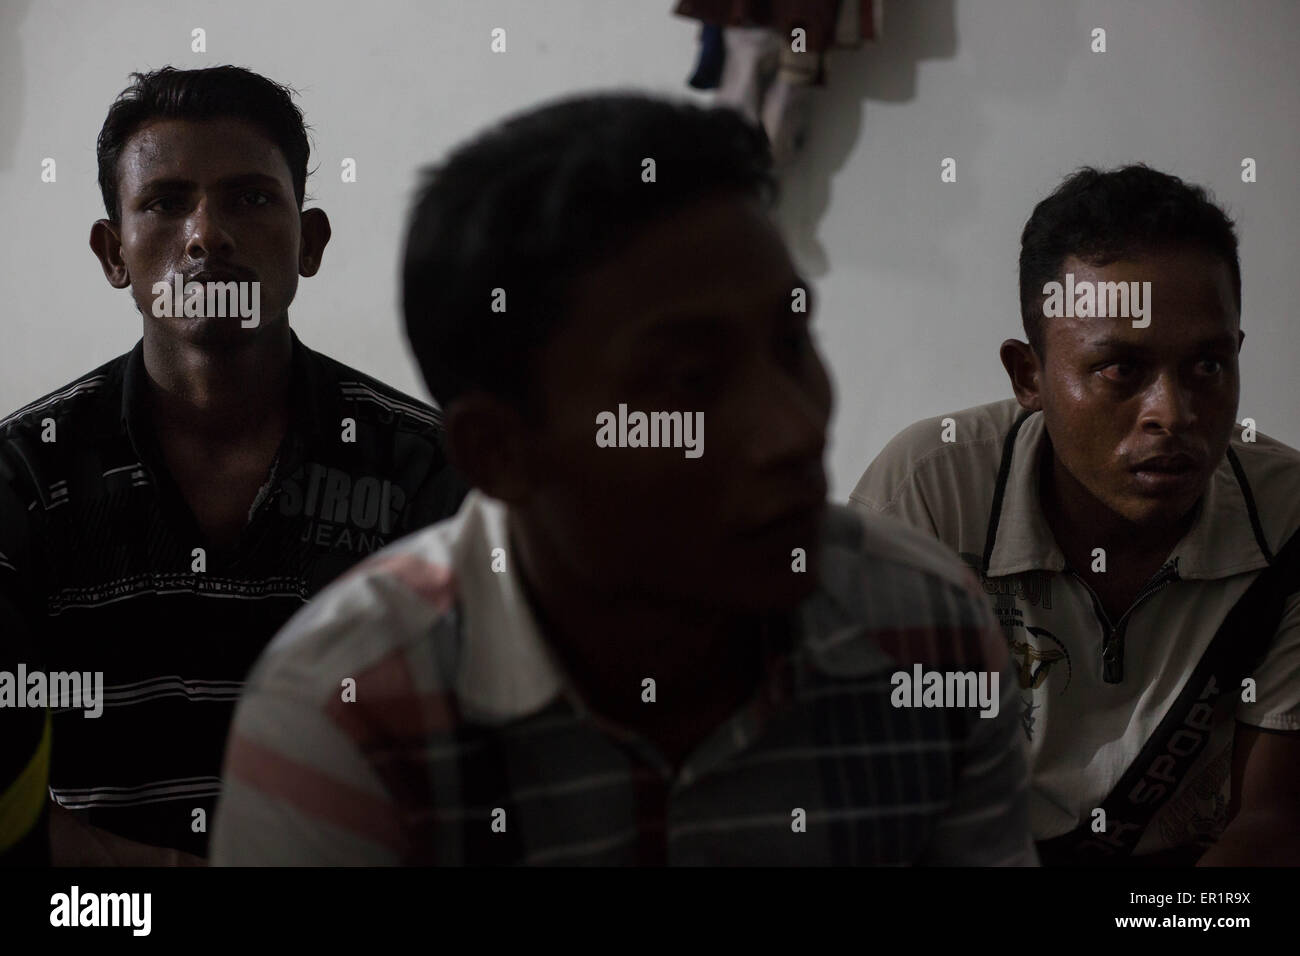 Langkawi, Malaysia. 20th May, 2015. Rohingya men gathered inside an abandoned building, after their end of work day.Norbashoor (left), he's 19 years old and he arrived here in Langkawi 1 year ago.Sabri Halam (middle), he's 20 years old and he's the brother of Mohamad Robil Alam.Muhammad Basin (right), he's 22 years old and he arrived here in Langkawi 7 month ago, he has no ID card or UN card.In Kuah district, not too far from the touristic area of Langkawi Island, and close from the airport.9 Rohingyas men aged between 15 and 26 years old, share a flat inside an abandoned building owned b Stock Photo